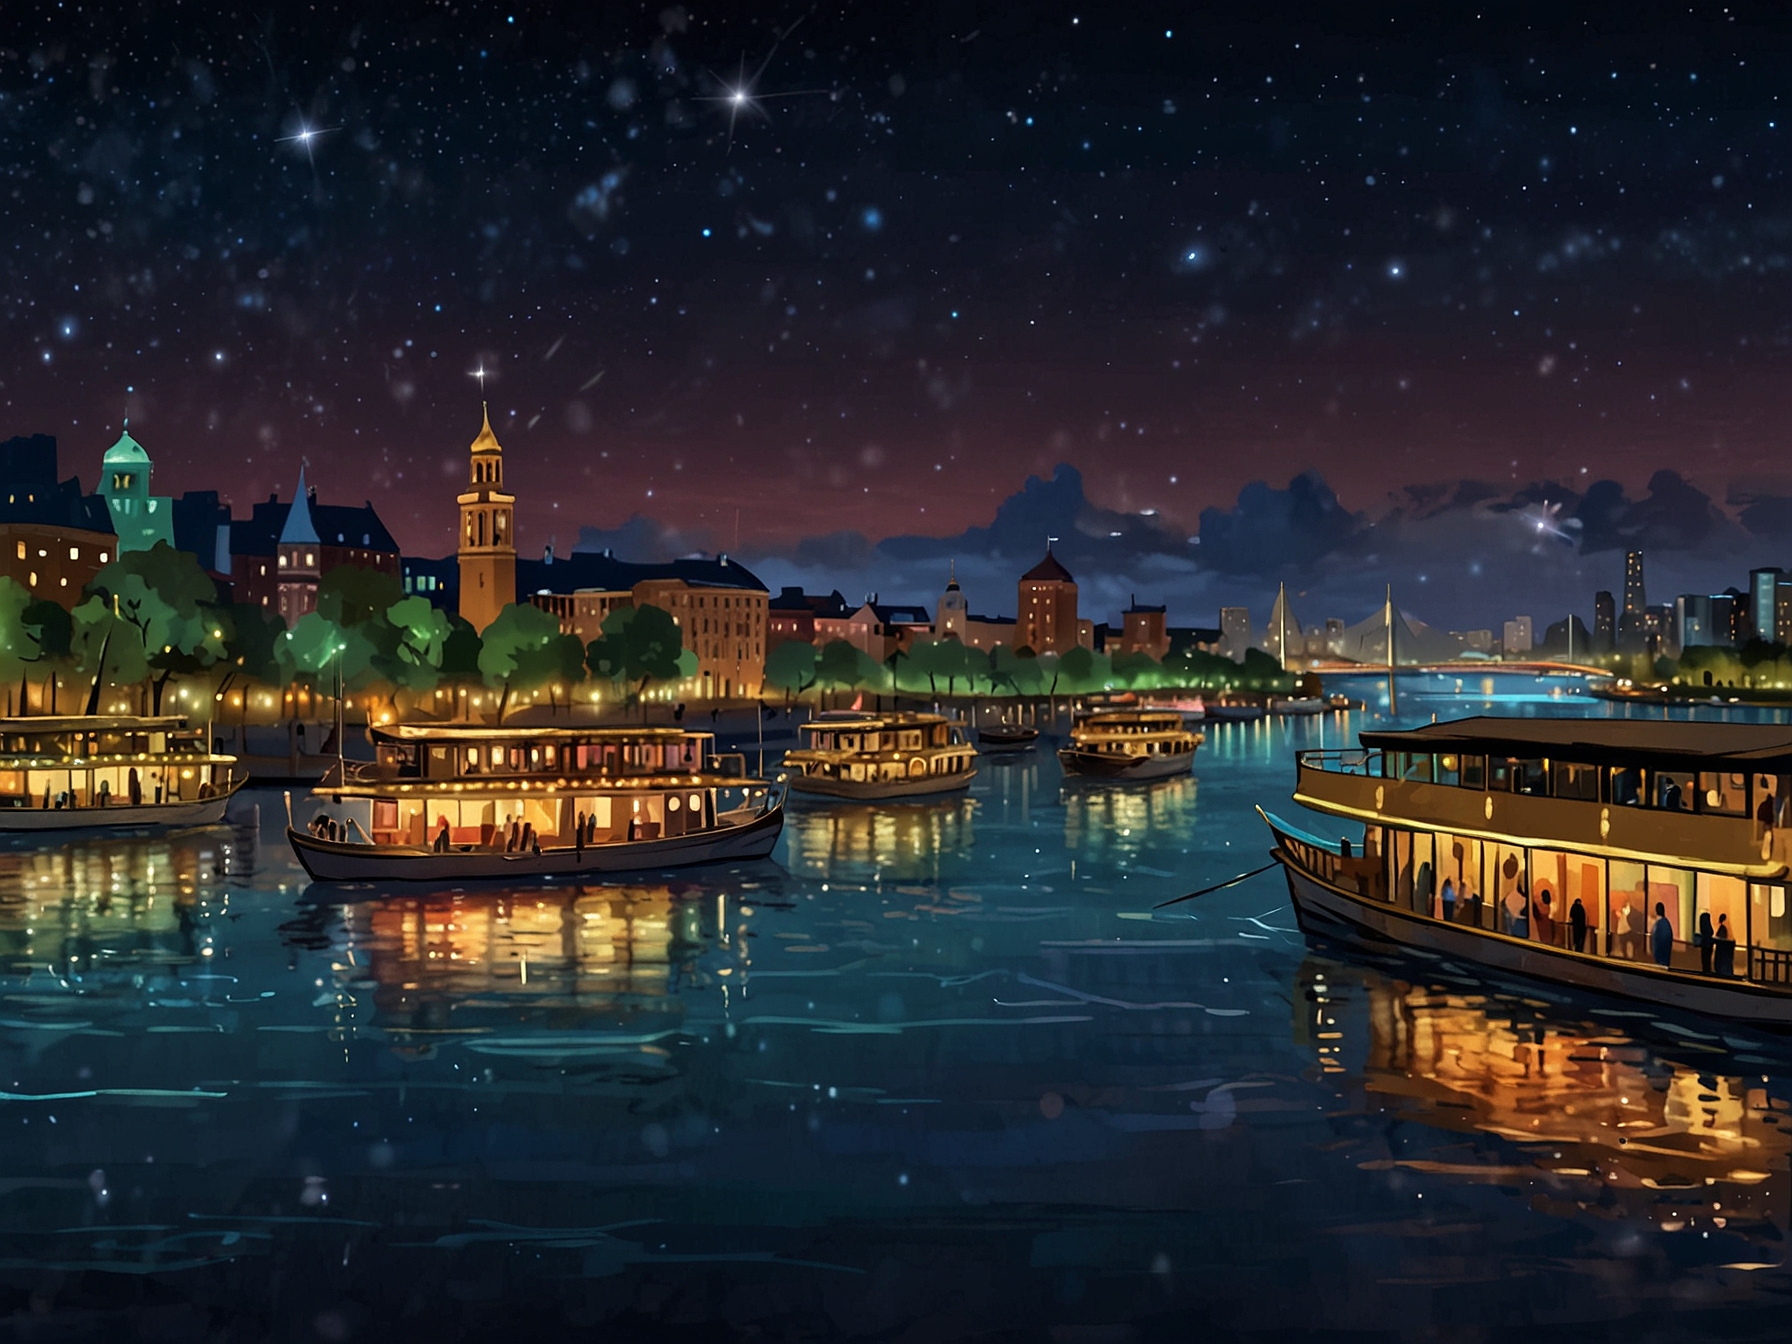 An enchanting view of secret floating nightclubs anchored on the city's waterways, illuminated against the night sky, with small boats ferrying party-goers to their exclusive dance floors.